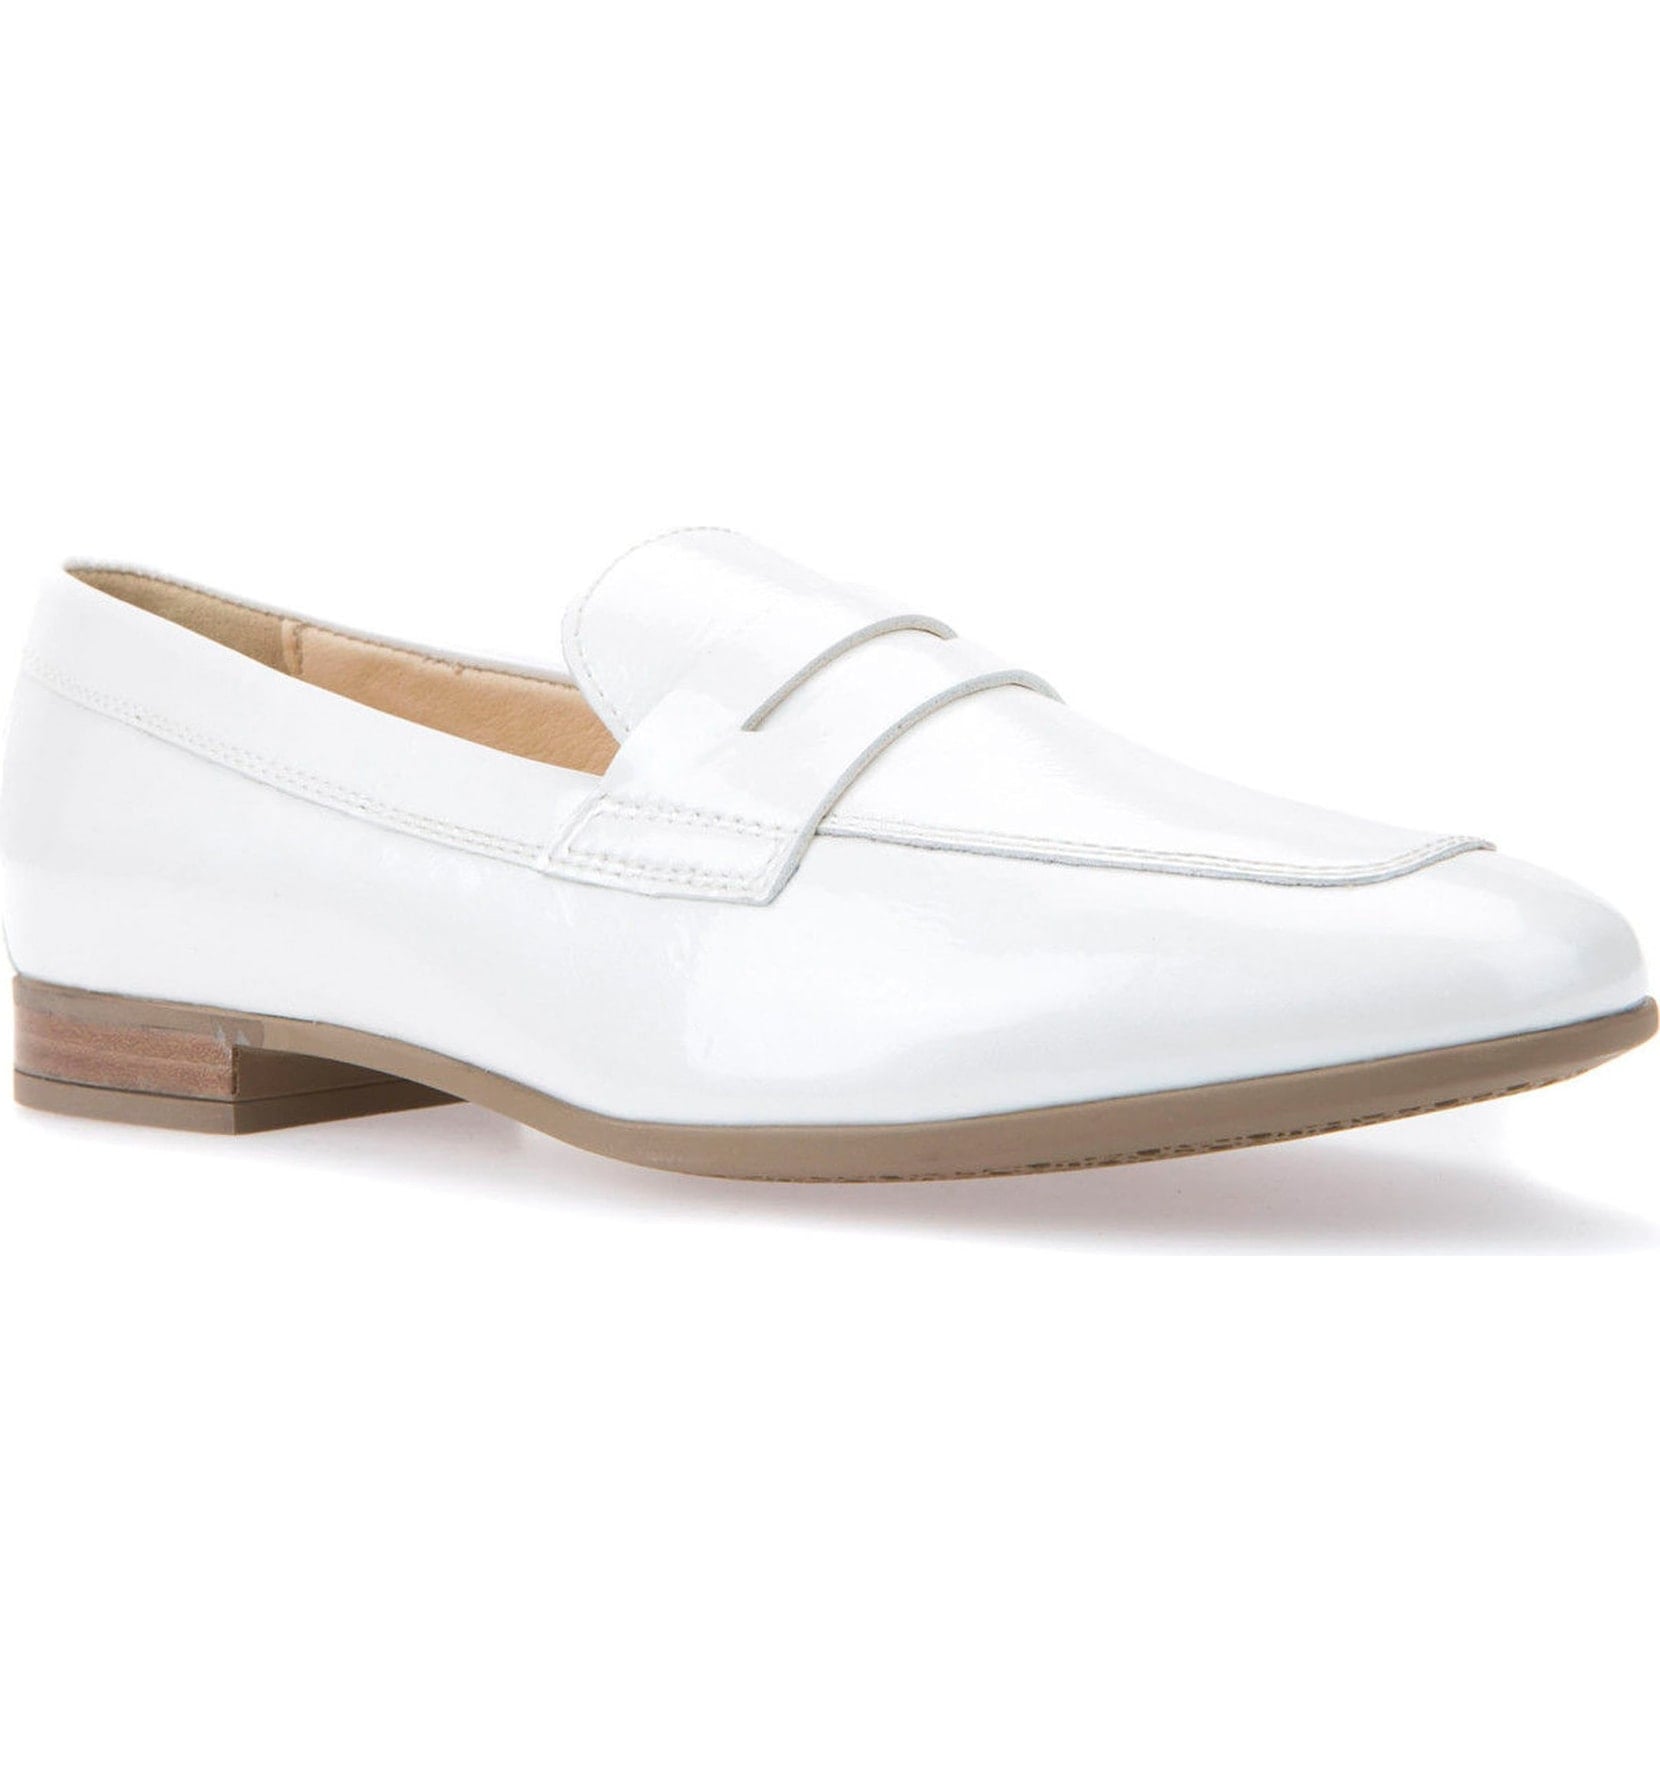 Geox Marlyna Penny Loafers | Nordstrom 